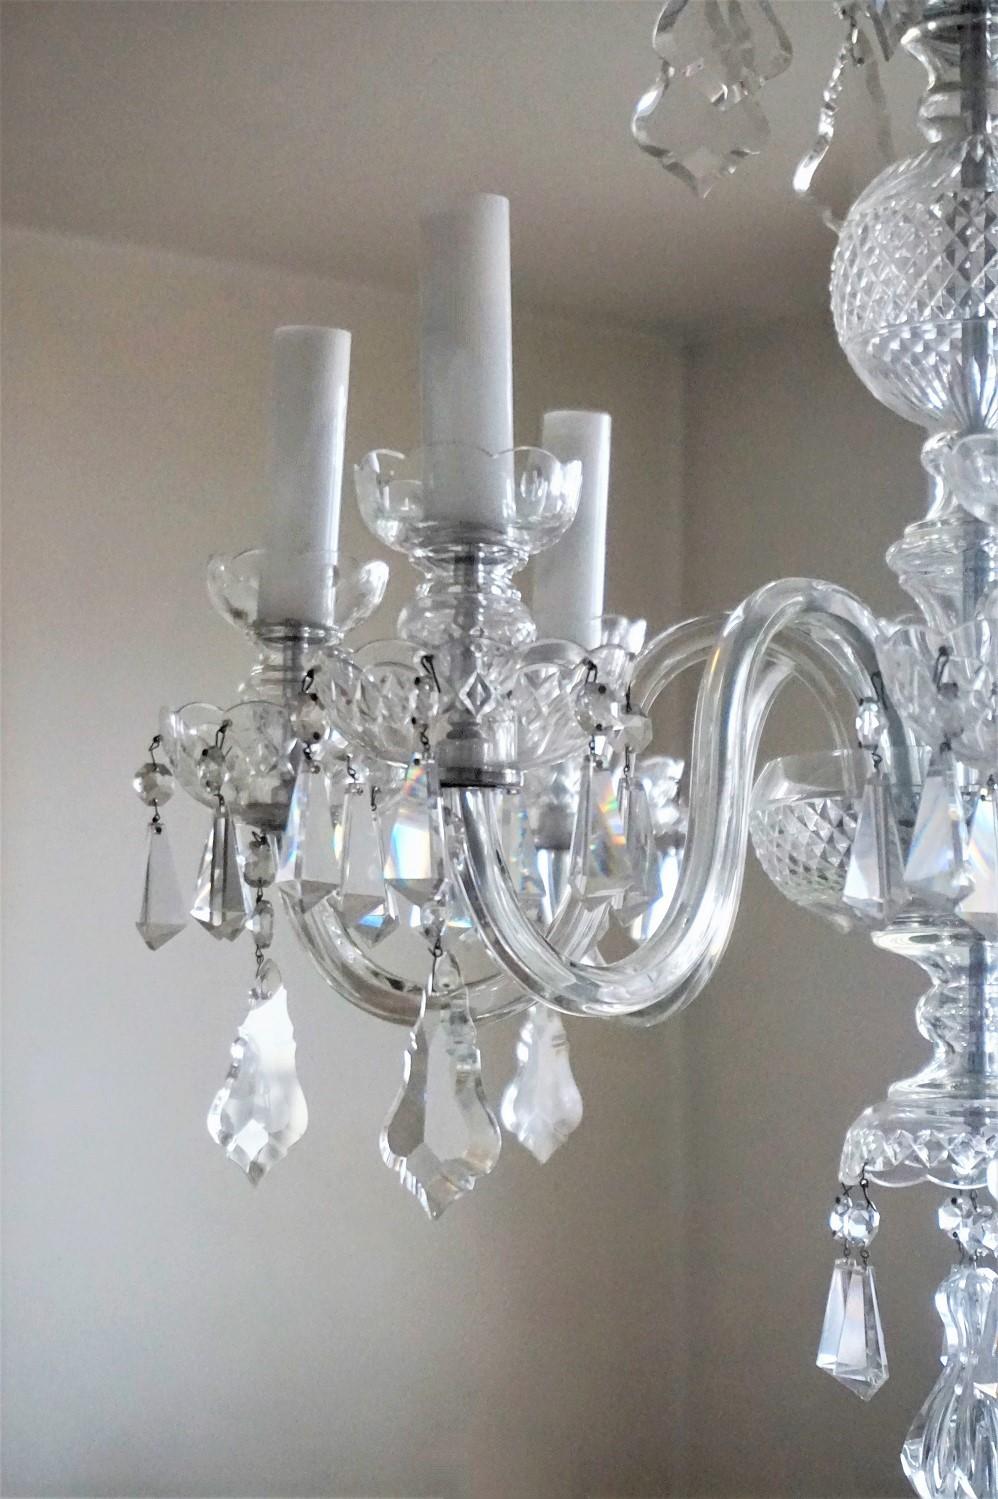 Large Original Venetian Handcrafted Murano Crystal Chandelier, Italy, 1910-1920 For Sale 3